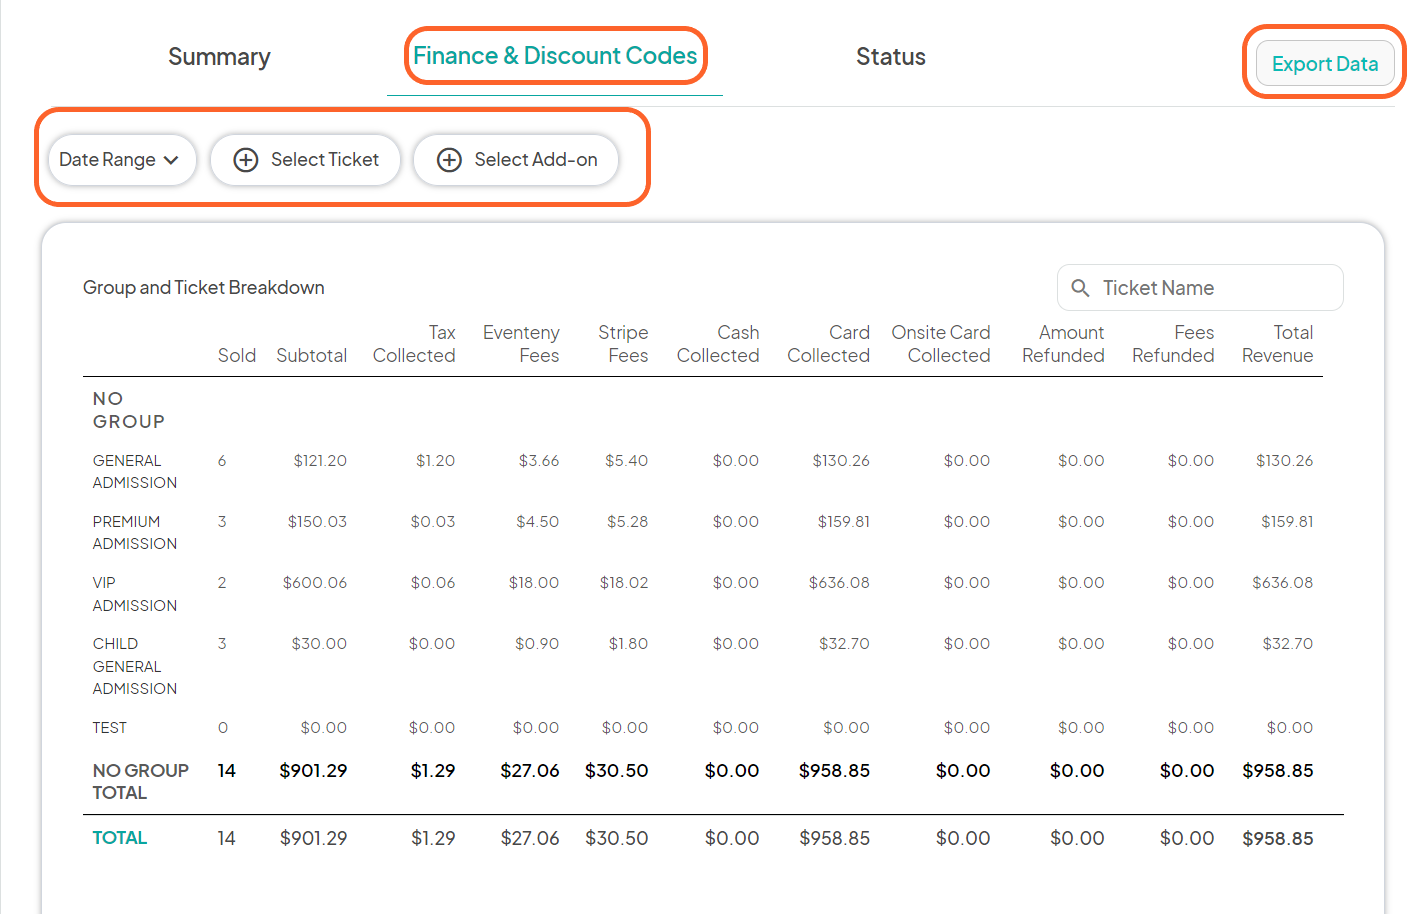 an image showing users the finance and discount codes section of the ticket analytics page with a variety of features highlighted